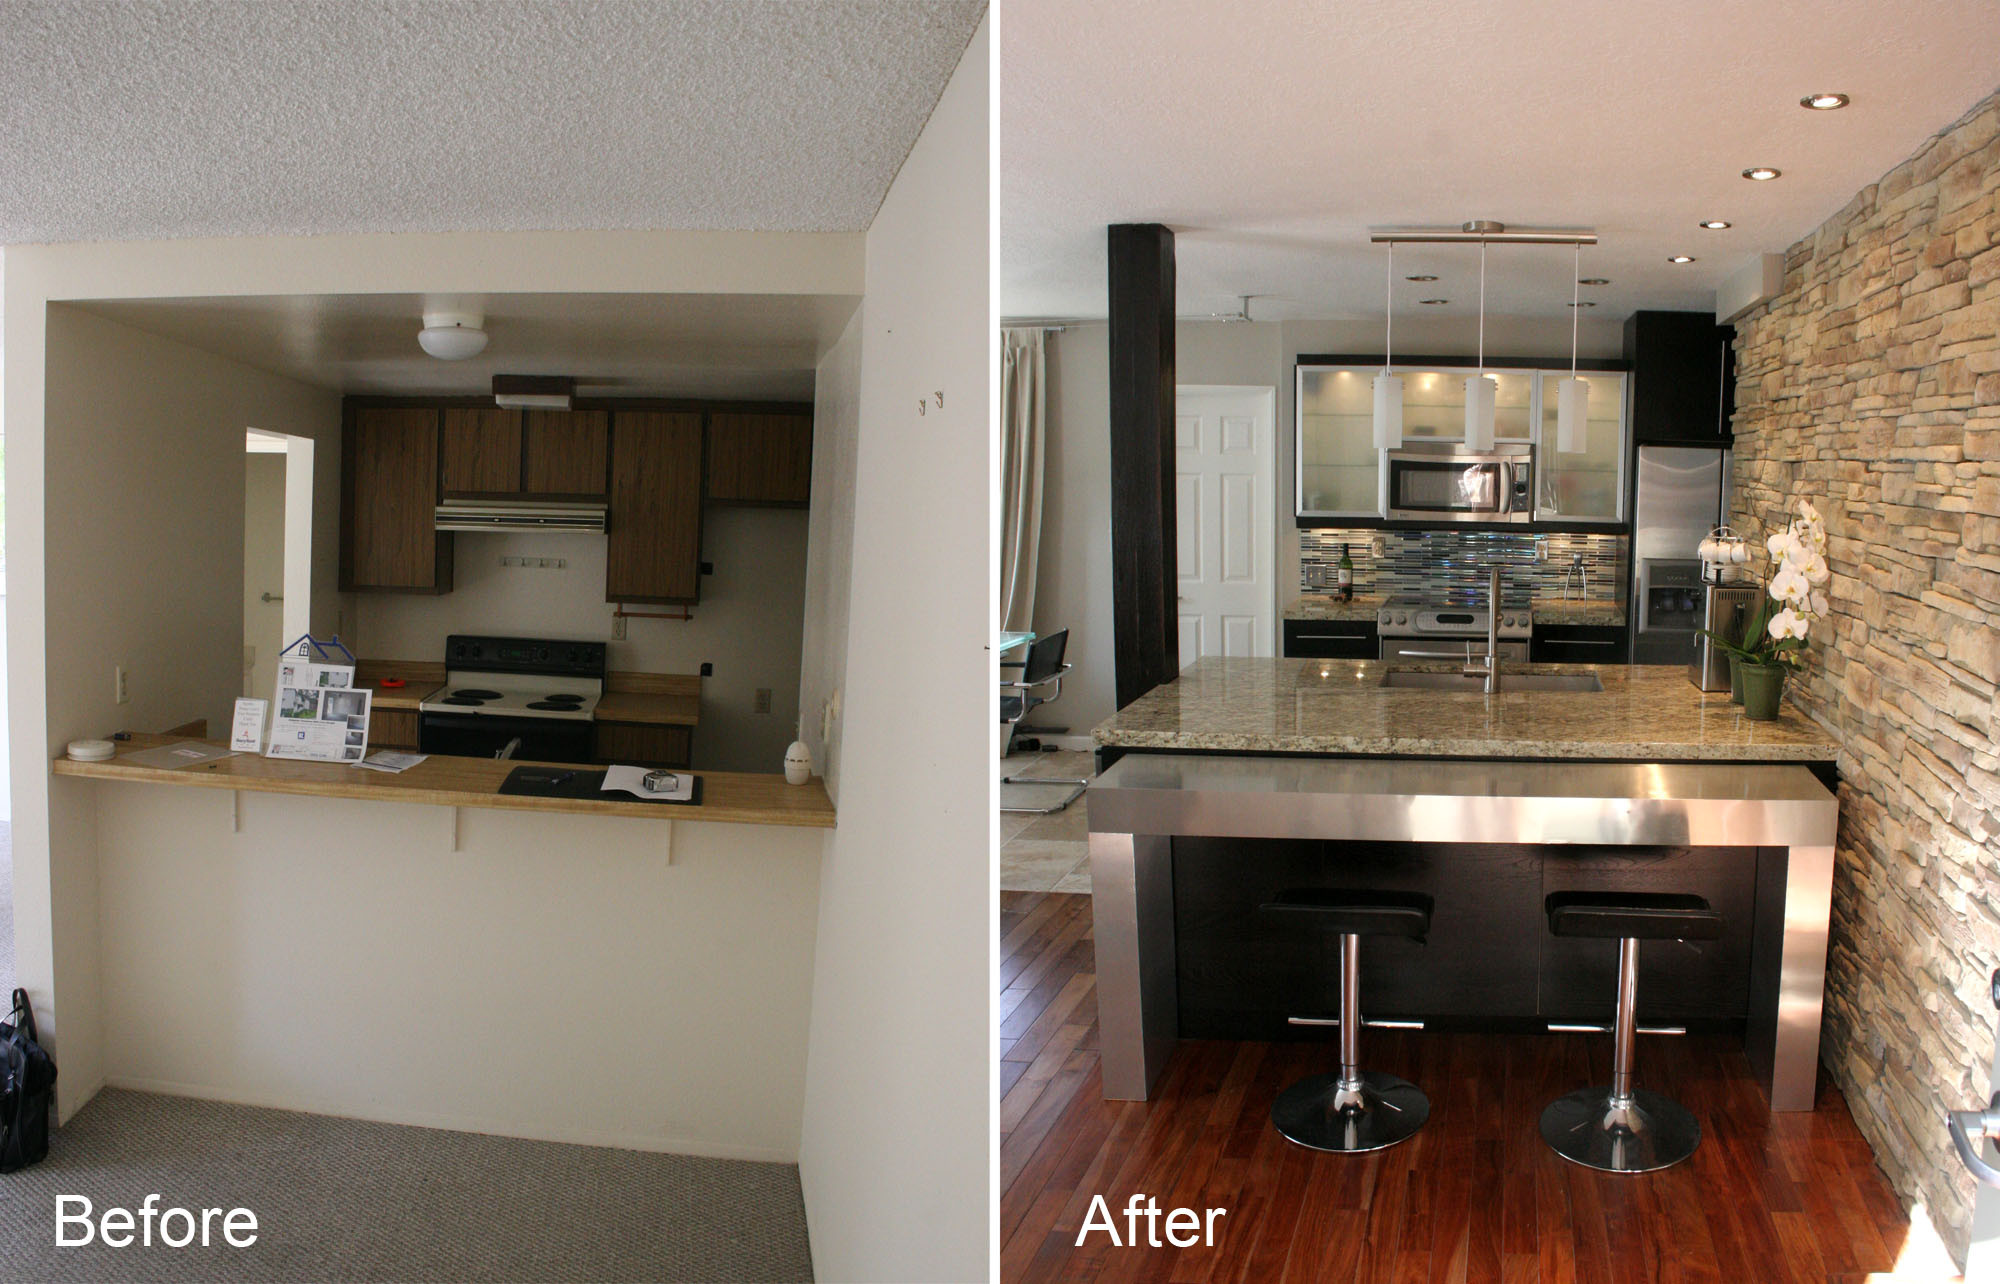 Before And After Kitchen Remodel
 Kitchen Planning and Design Kitchen remodeling in a